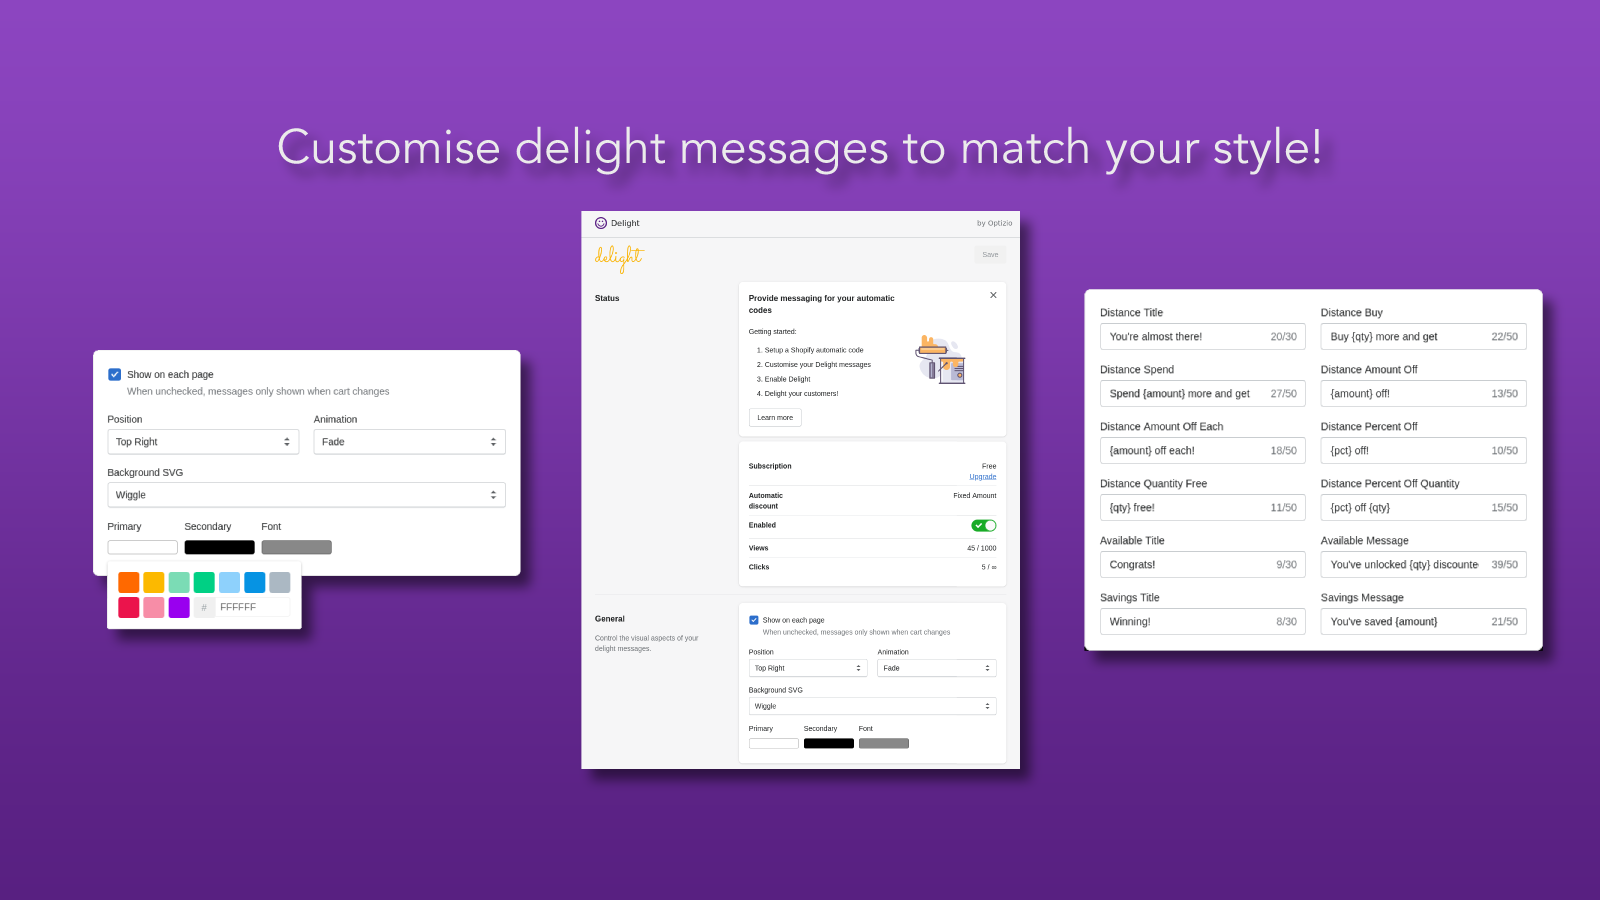 Customise your messages